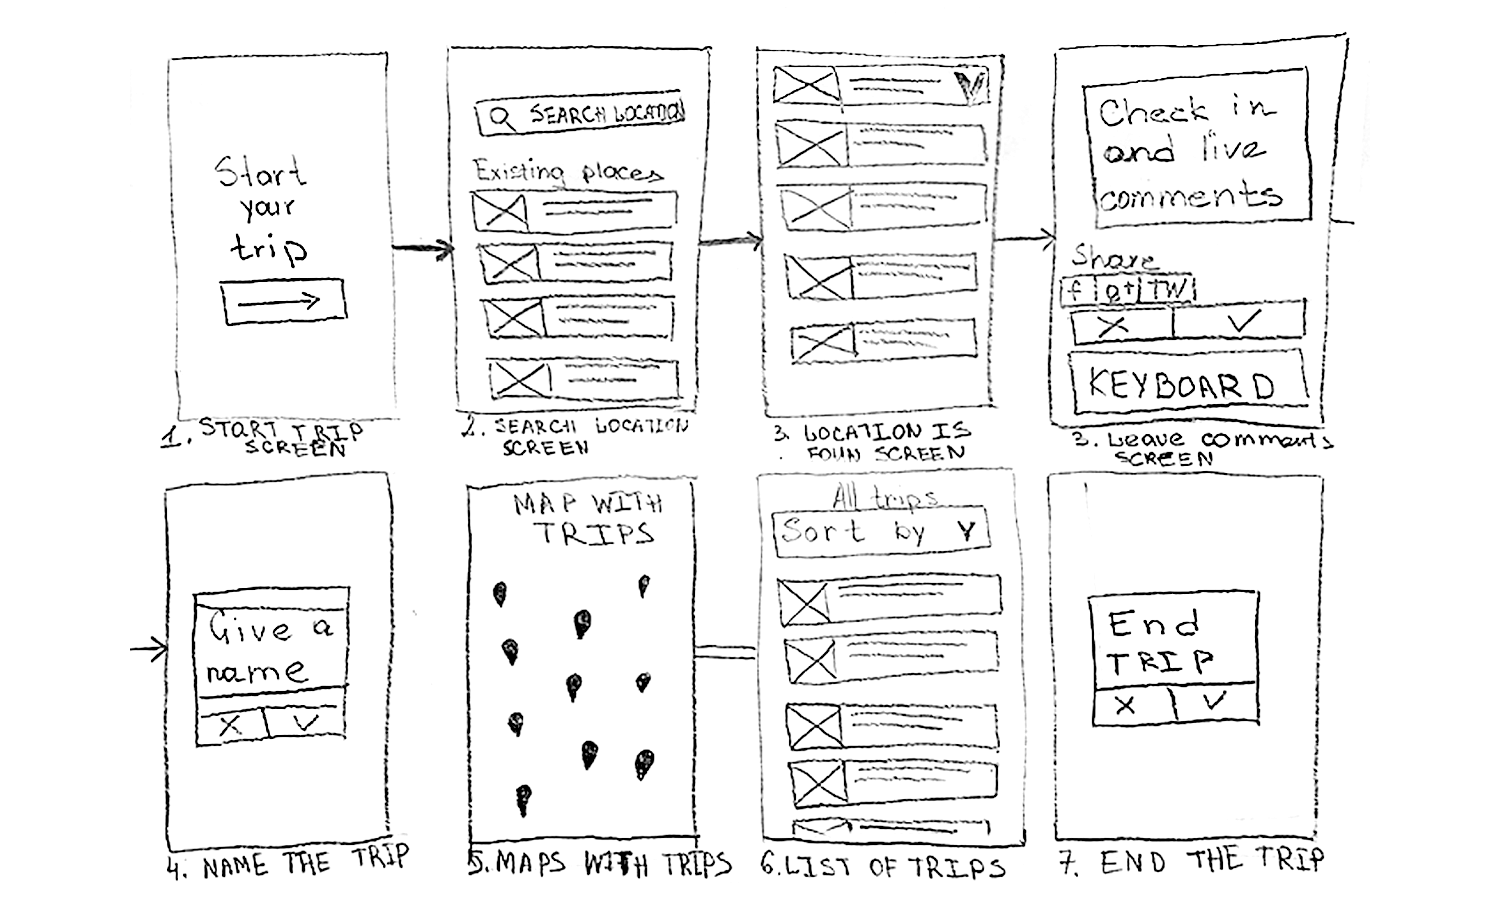 Sketches of a trip tracker app wireframe showing user navigation from starting, searching, and naming a trip to commenting and ending it.